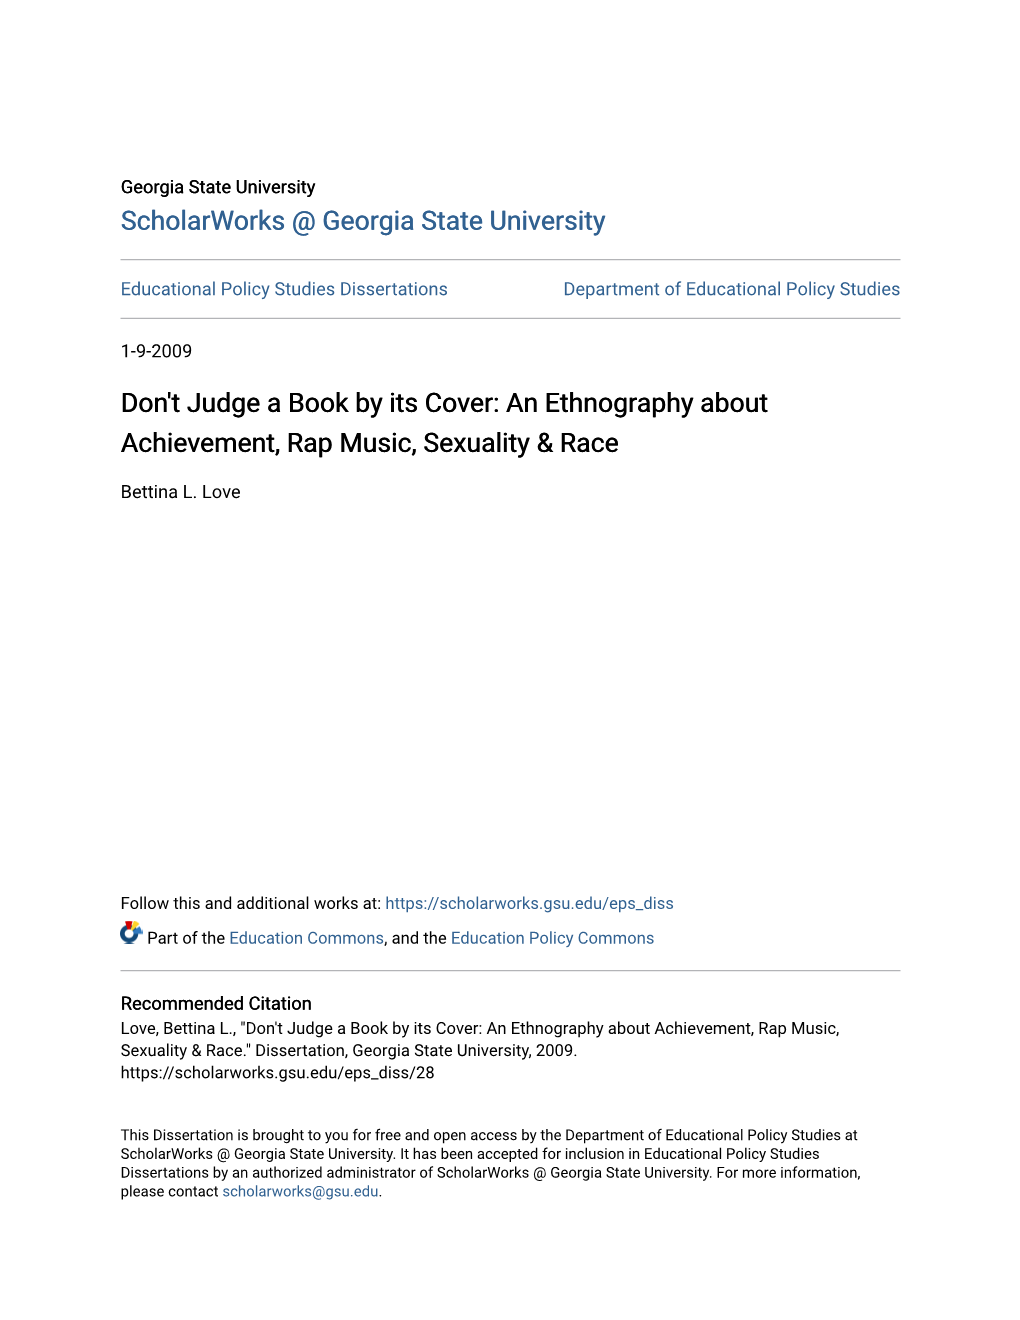 Don't Judge a Book by Its Cover: an Ethnography About Achievement, Rap Music, Sexuality & Race